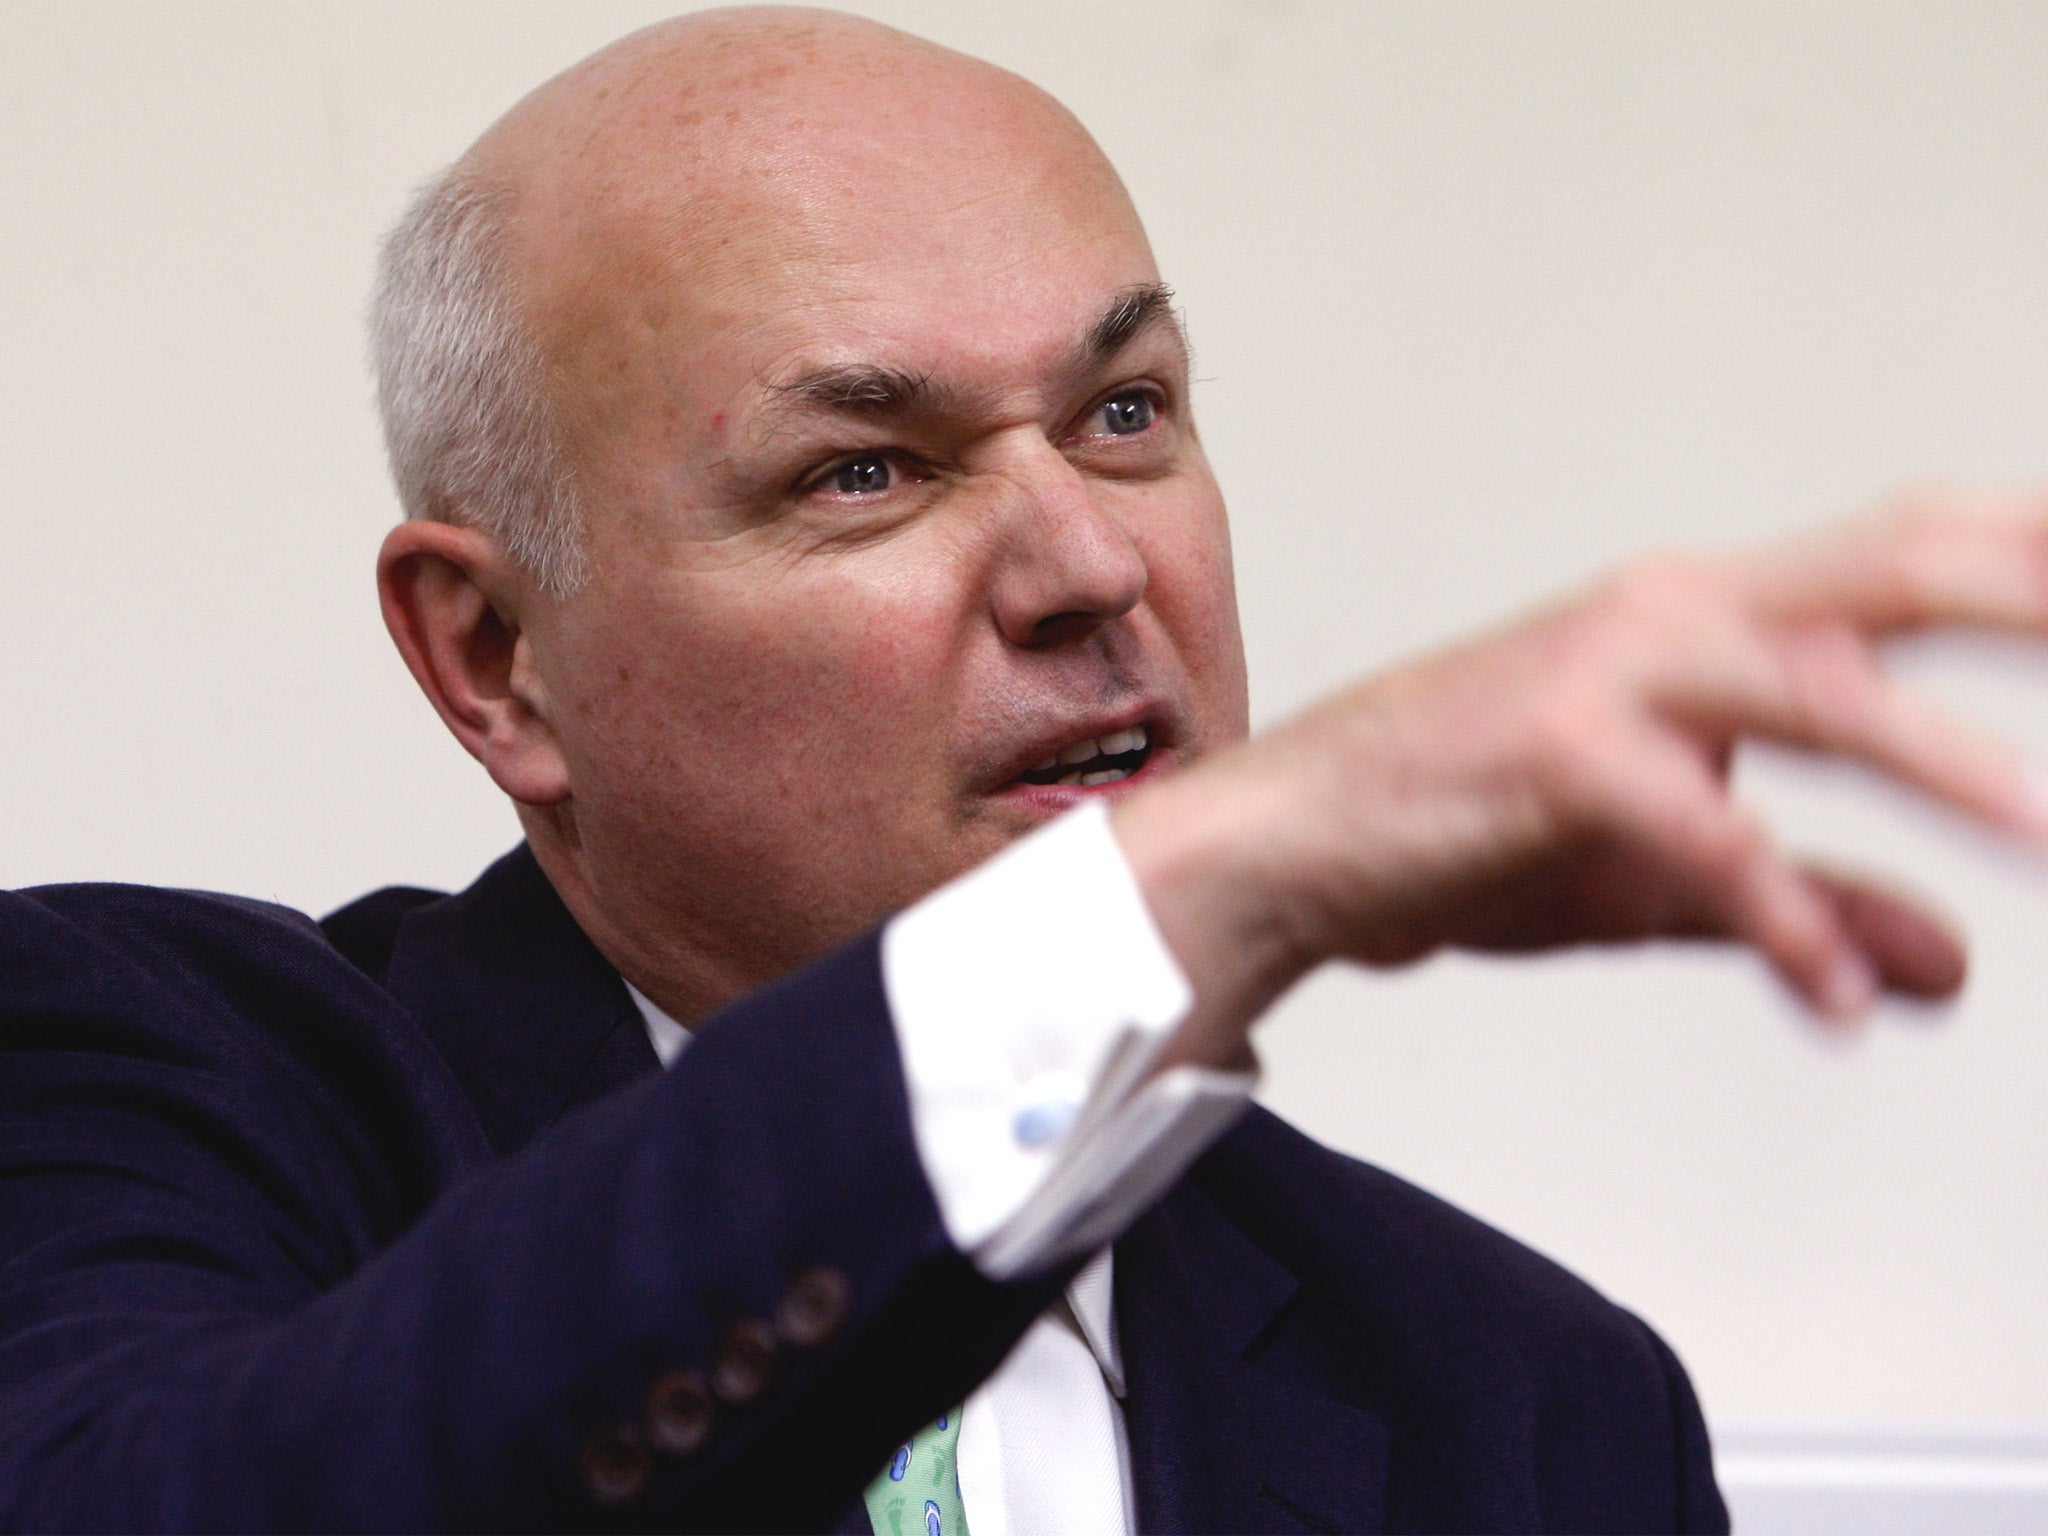 Iain Duncan Smith opposes plans for £12bn of further cuts from next year